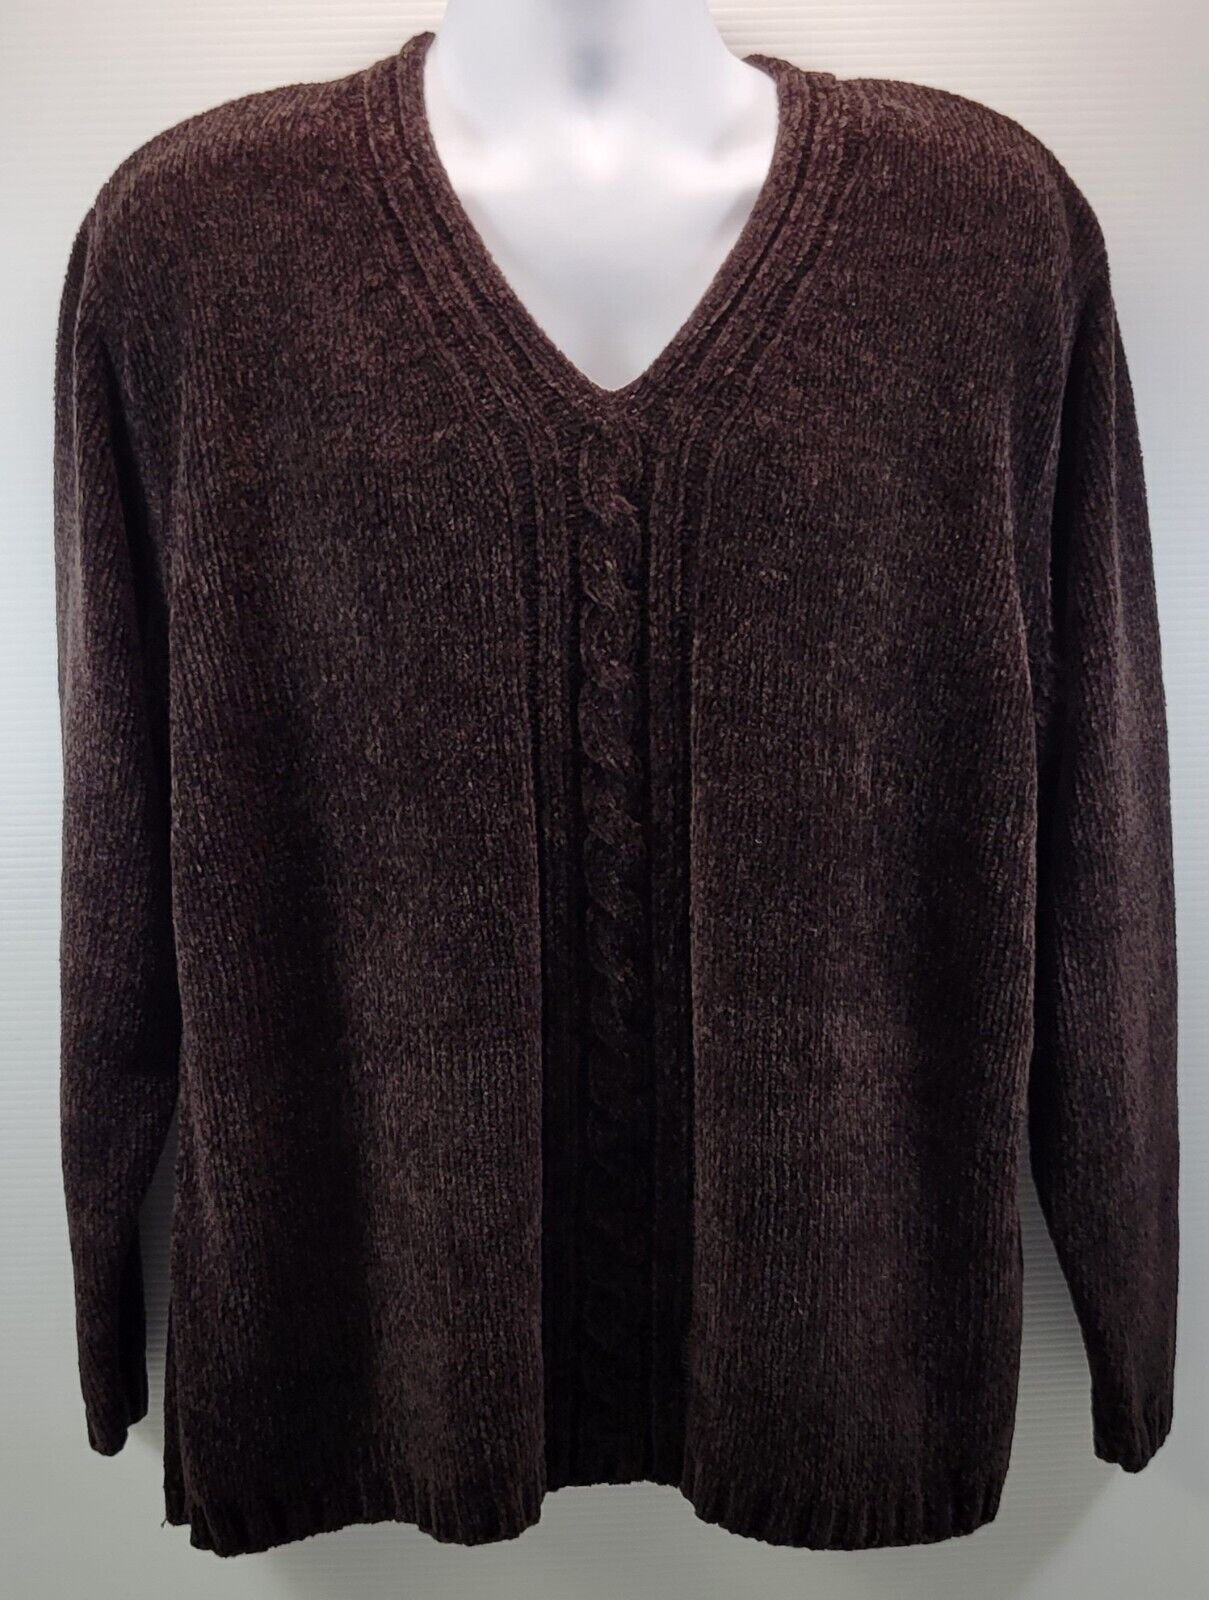 Primary image for L) Women's Emily Rose Brown Pullover Soft Acrylic Sweater XL